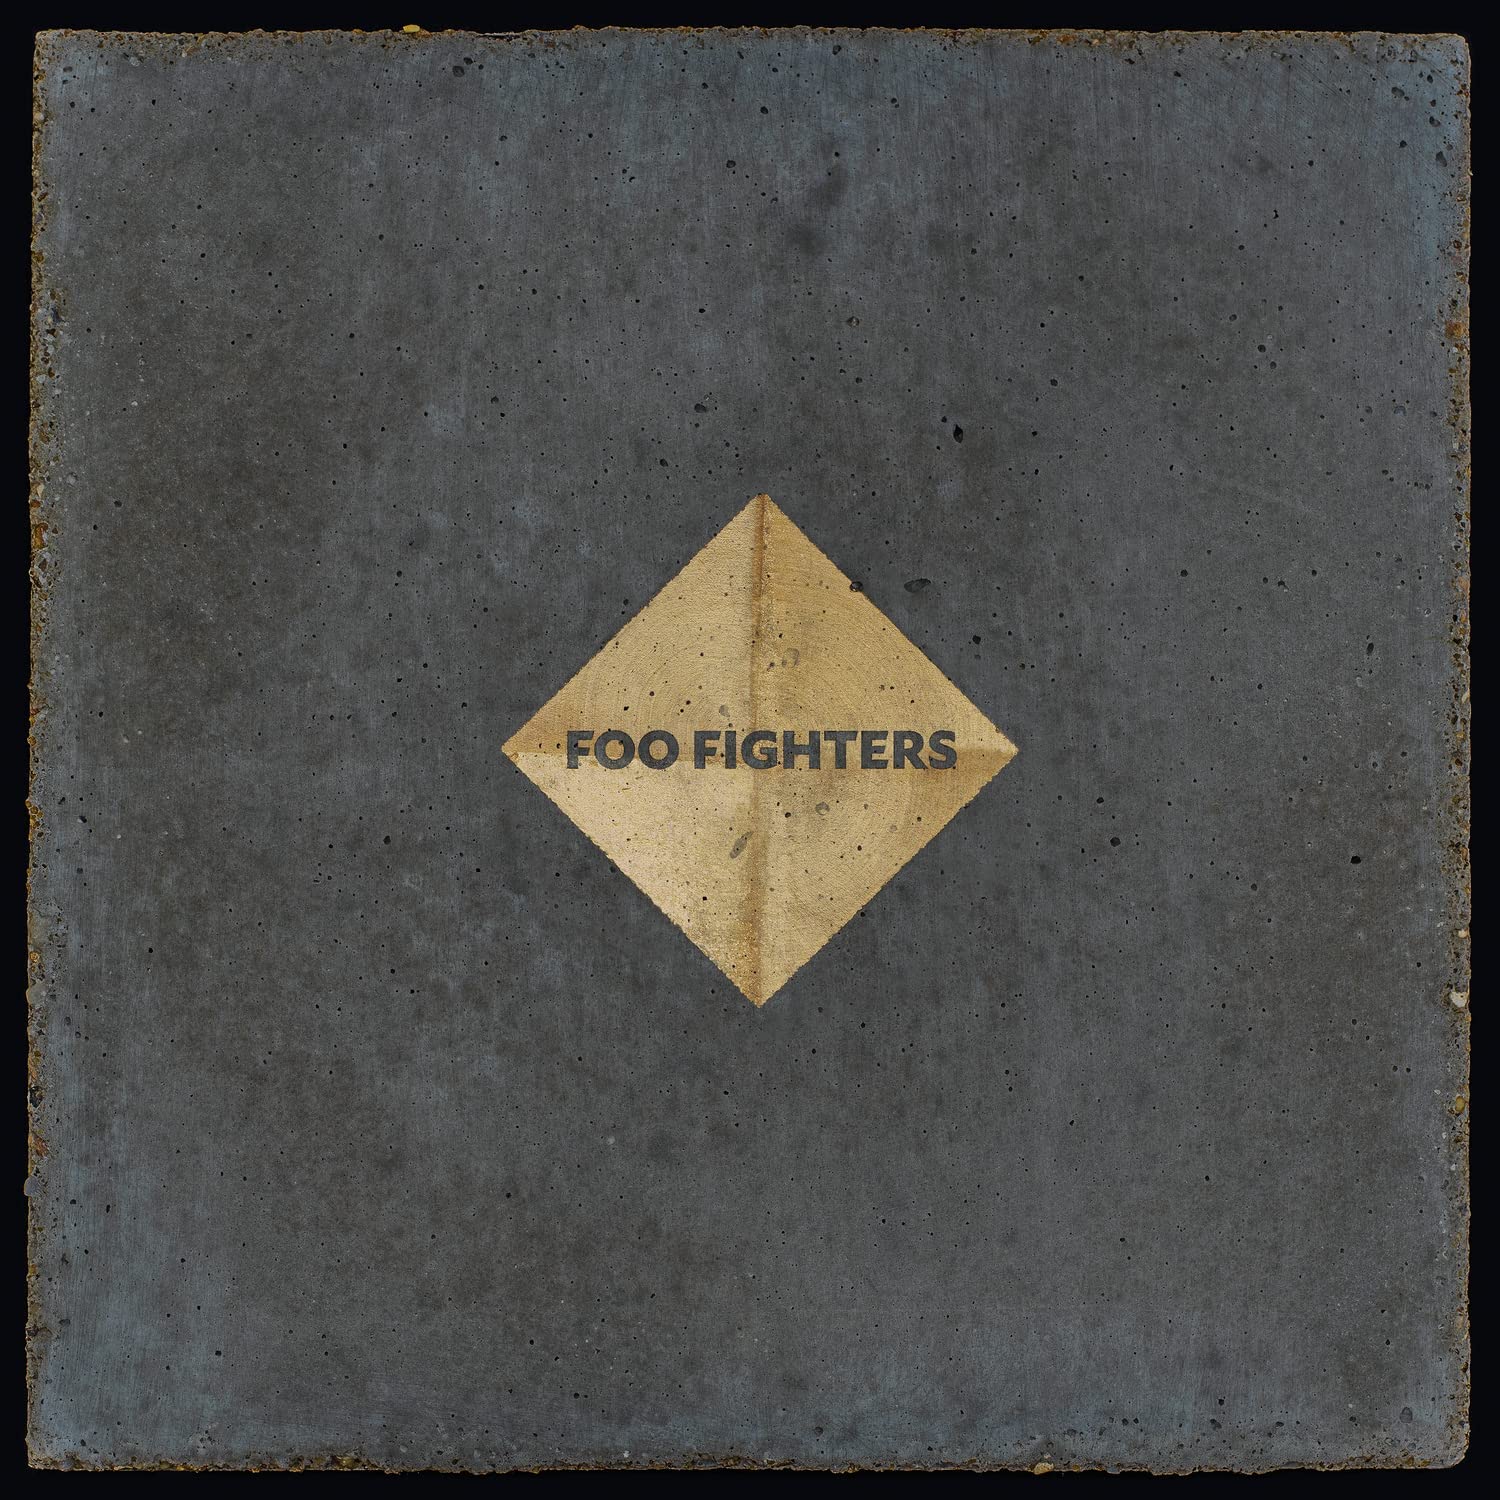 Foo Fighters "Concrete And Gold" Vinyl